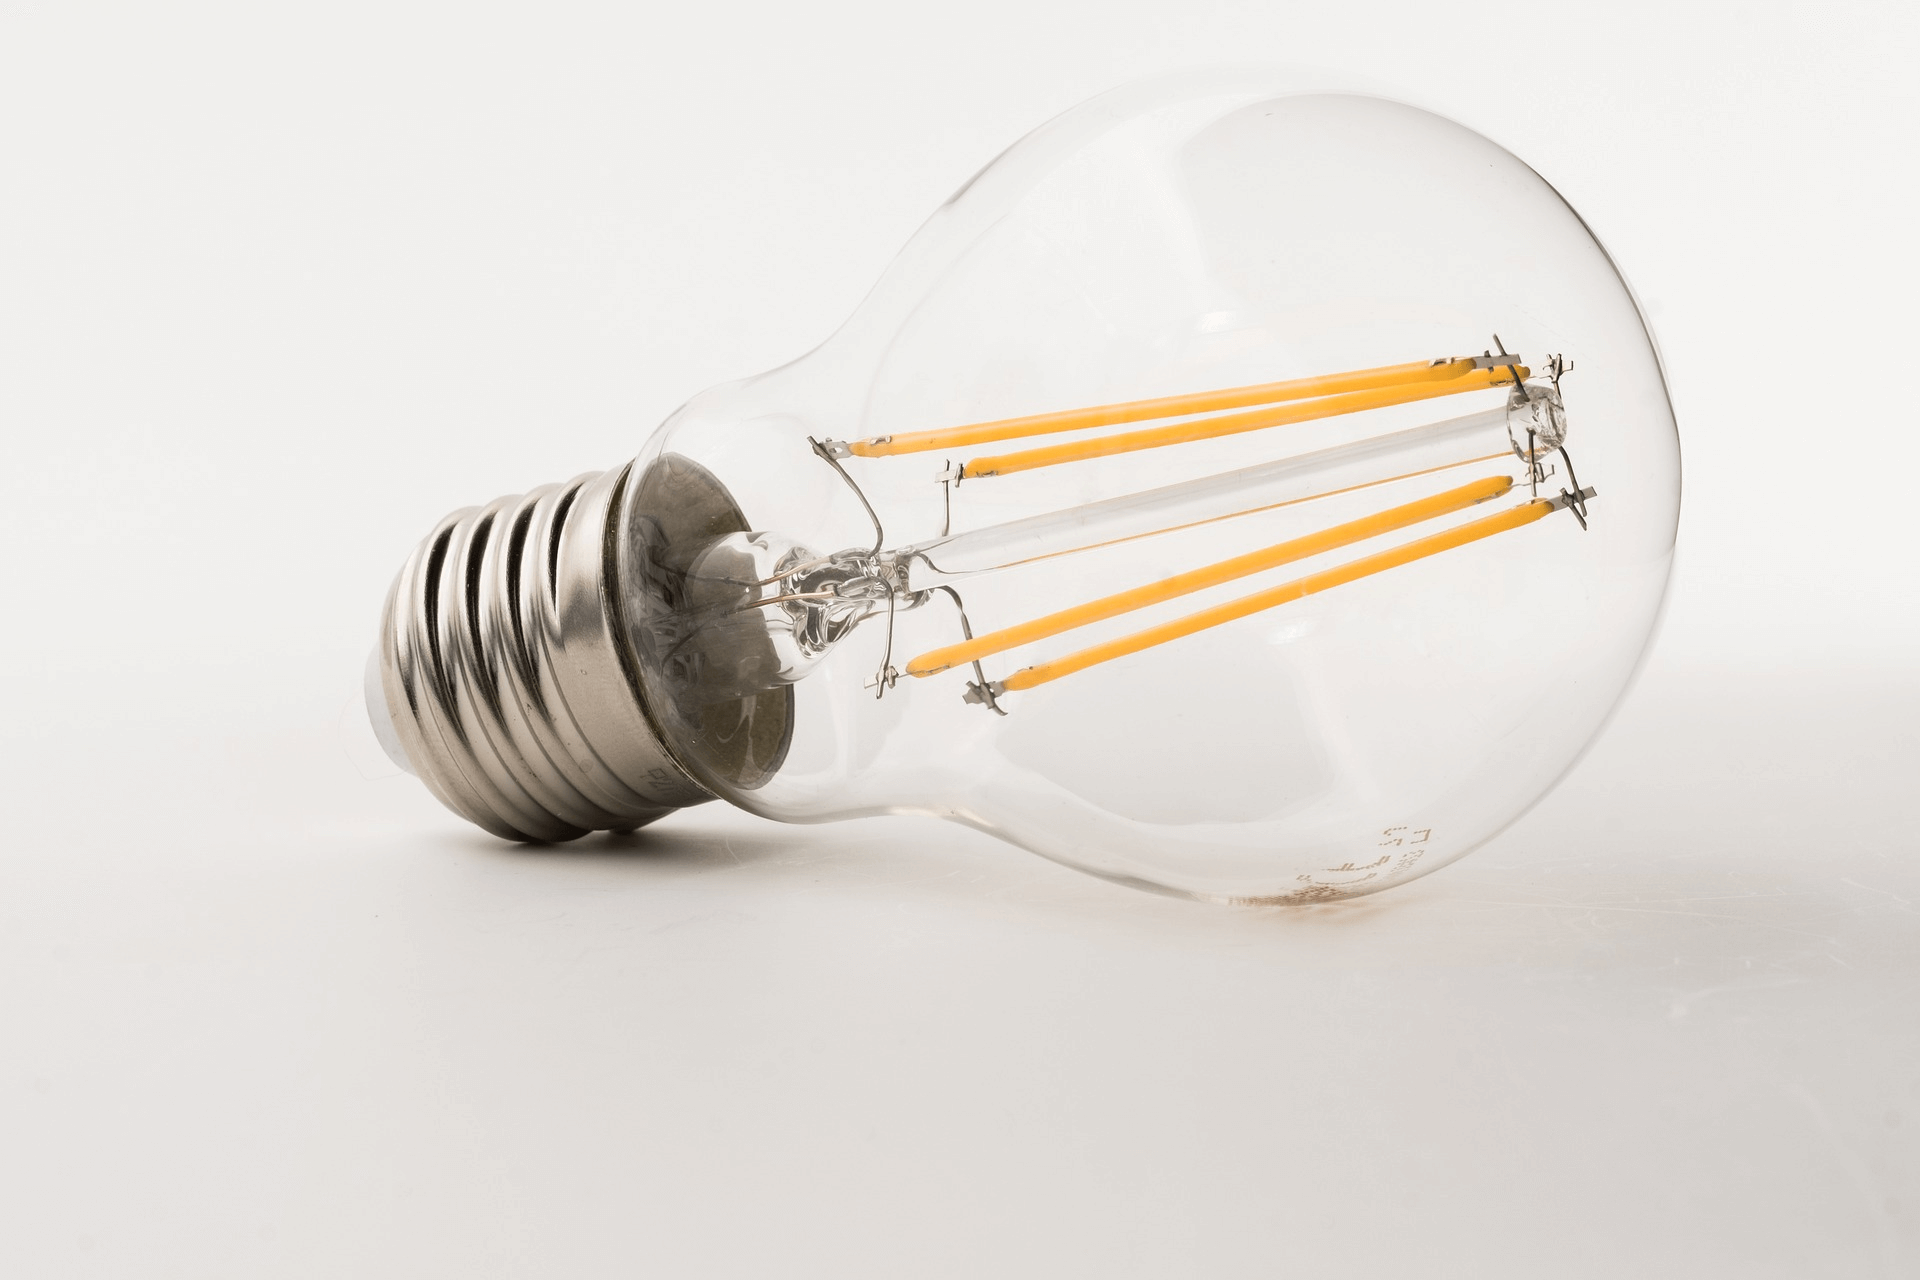 energy efficient light bulbs with high luminous efficacy LED filament that produces very little heat